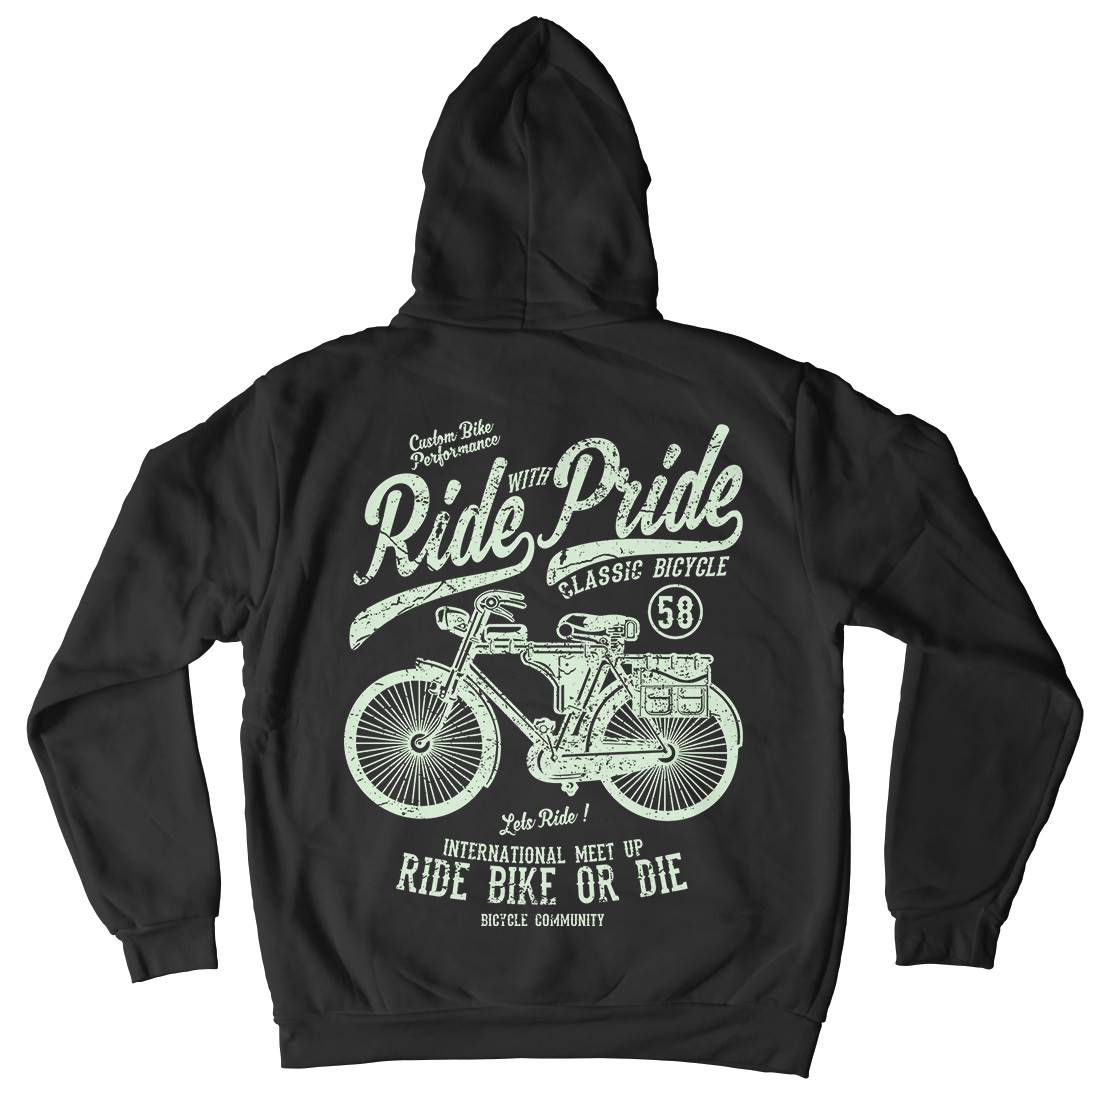 Ride With Pride Mens Hoodie With Pocket Bikes A121